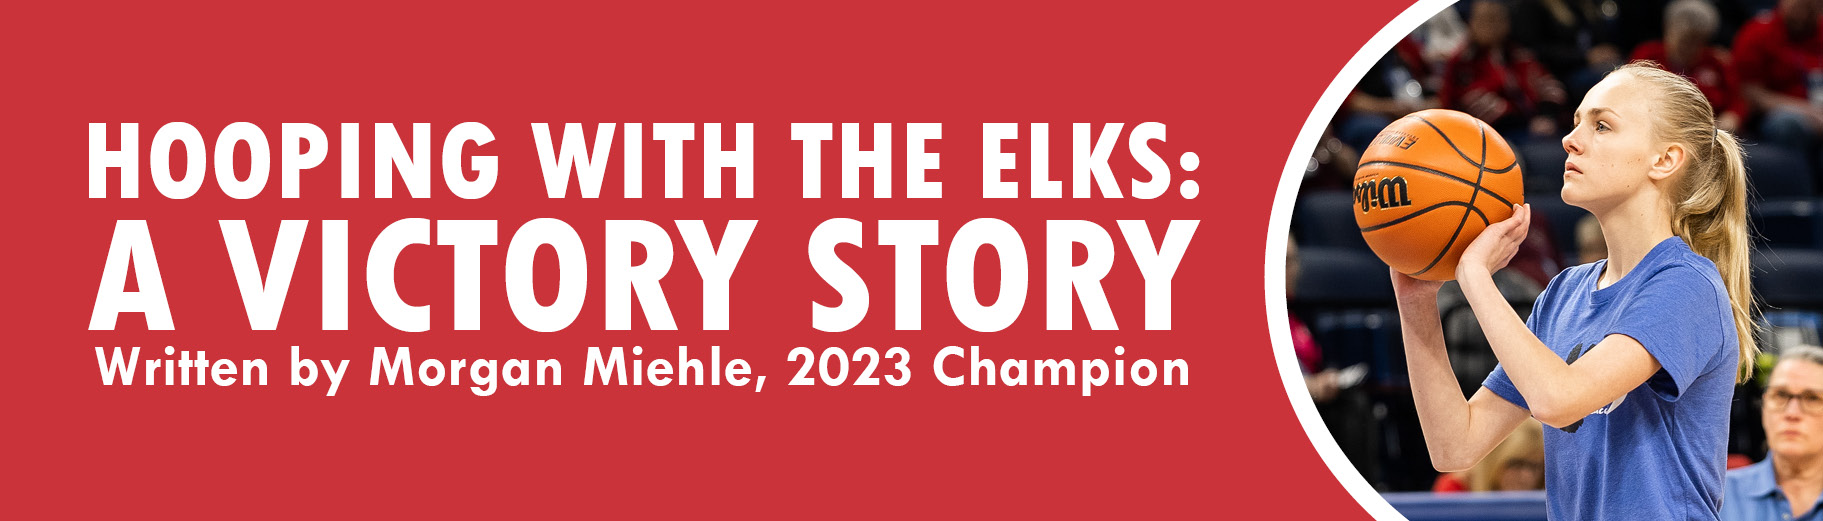 Hooping with the Elks: A Victory Story